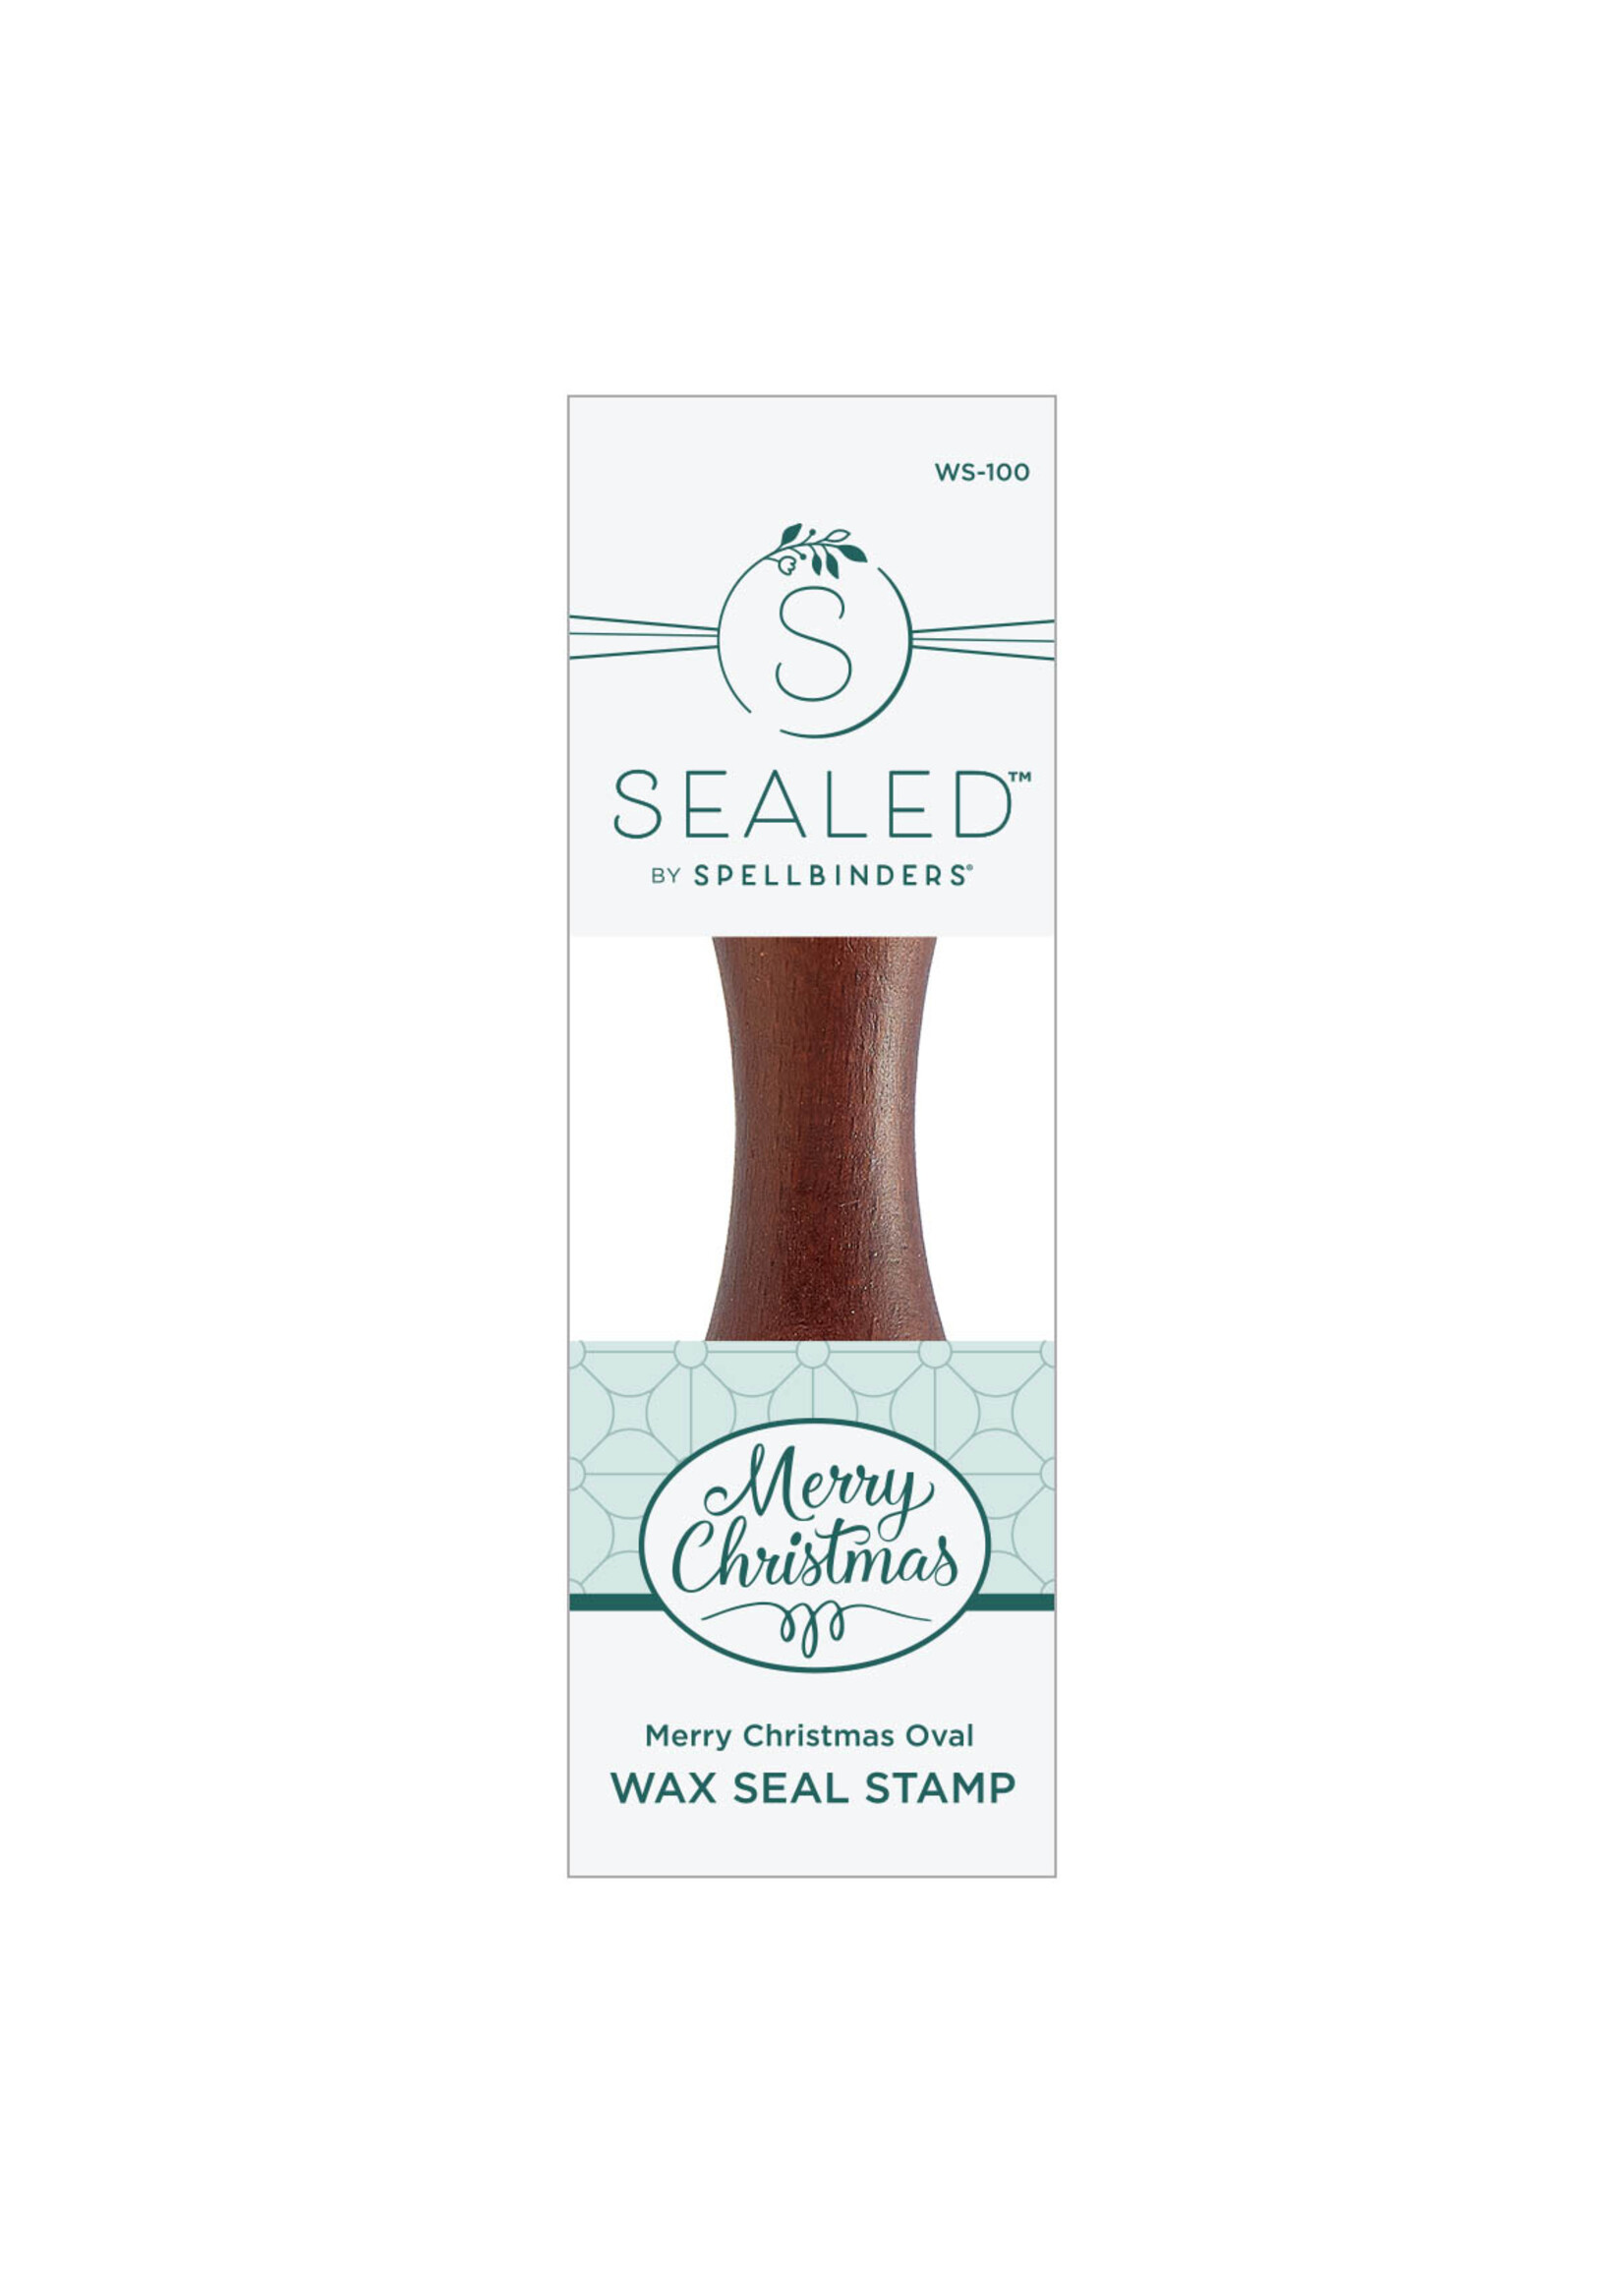 spellbinders Merry Christmas Oval Wax Seal Stamp from the Sealed for Christmas Collection